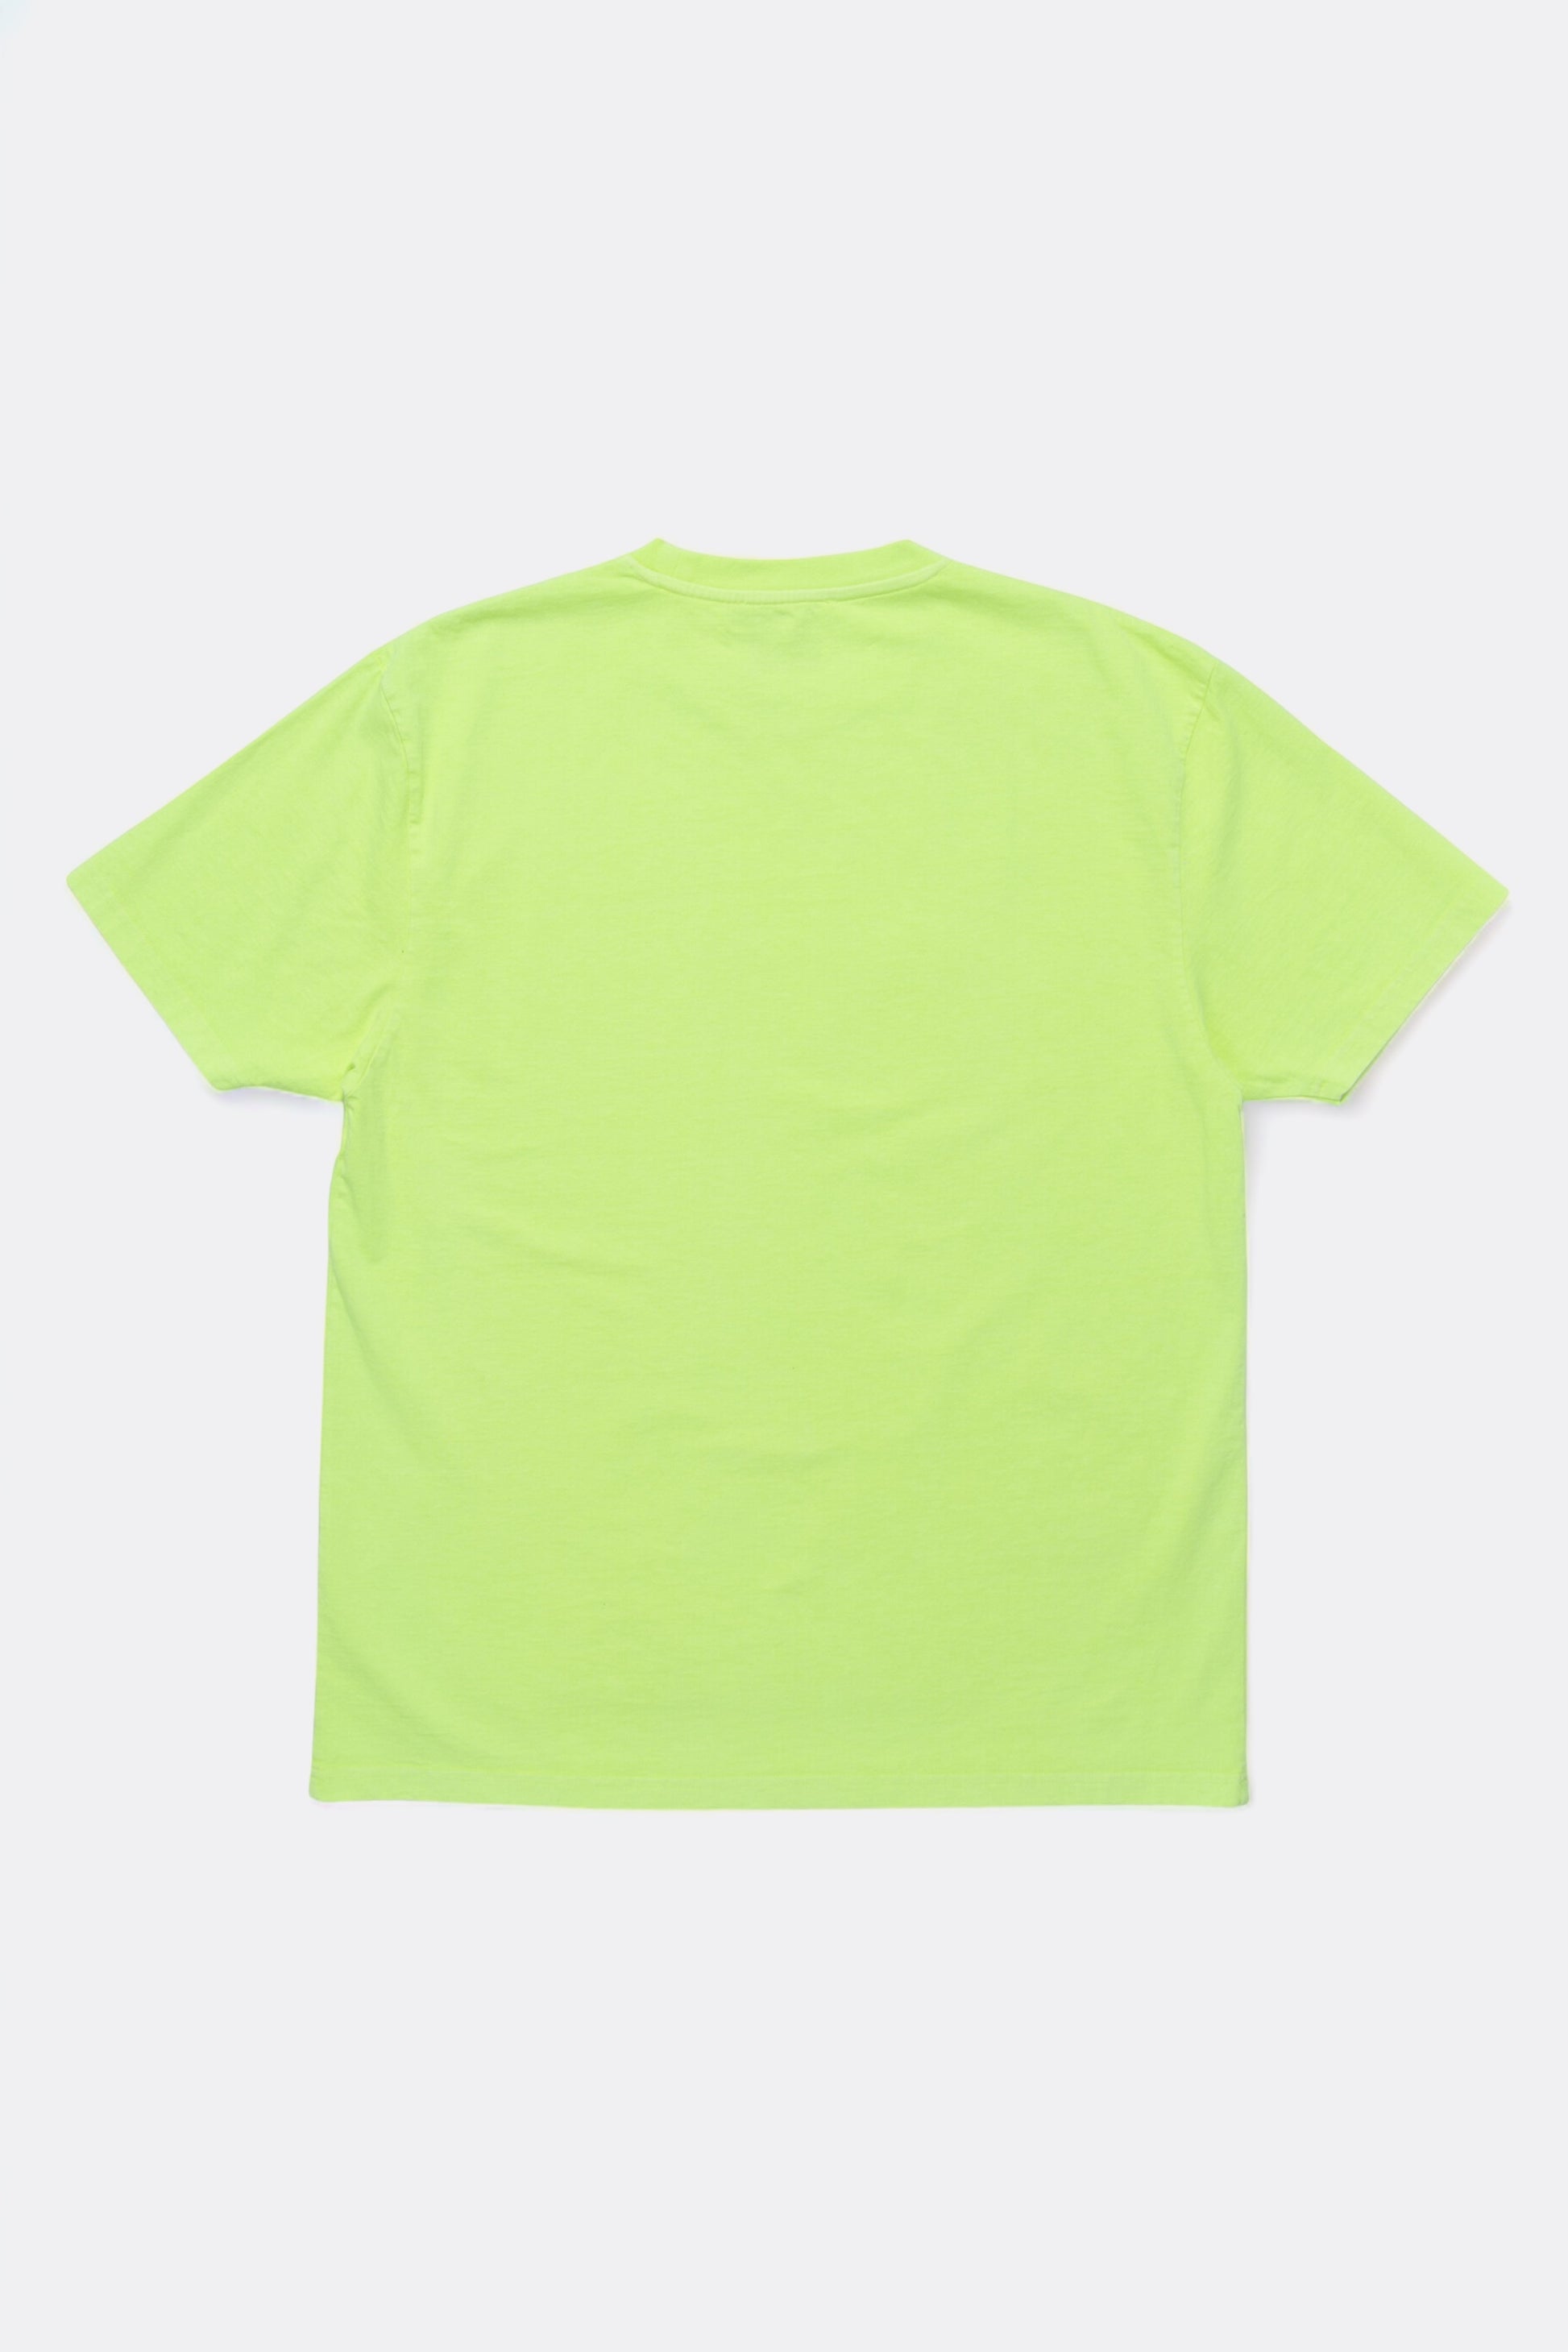 New Amsterdam Surf Association - Name Tee Safety (Green)